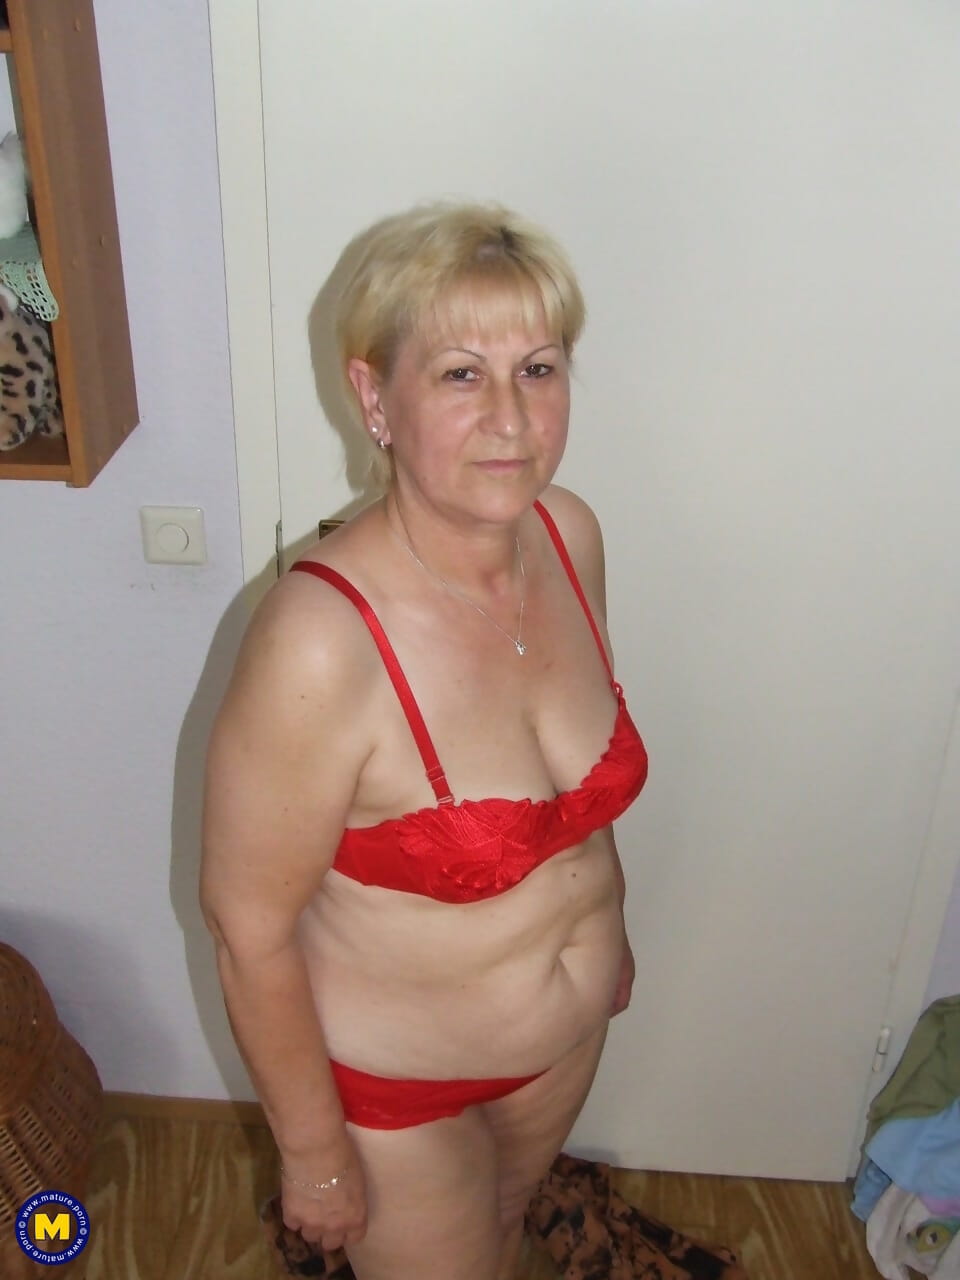 Fatty granny with saggy tits removes red lingerie and poses nude in bedroom